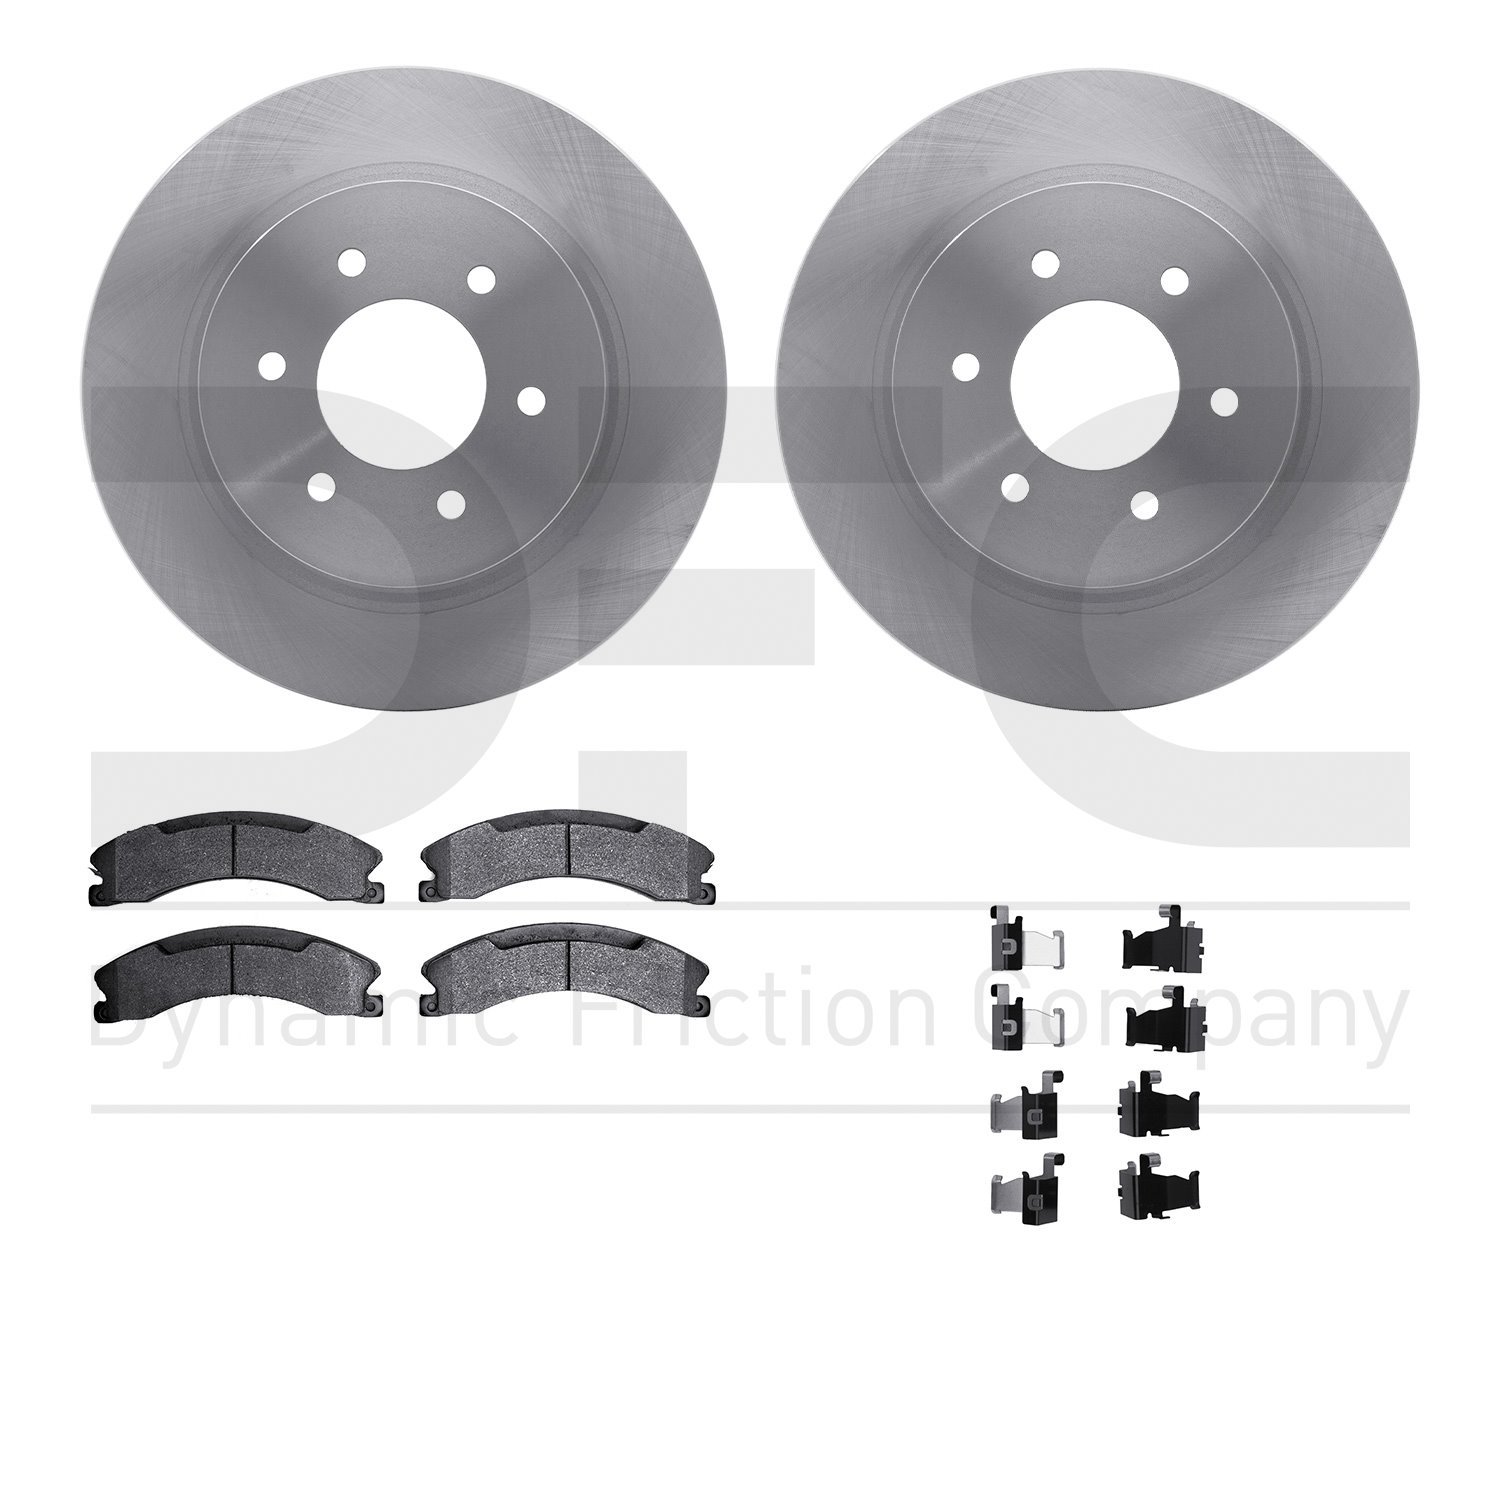 6412-67022 Brake Rotors with Ultimate-Duty Brake Pads Kit & Hardware, Fits Select Infiniti/Nissan, Position: Front